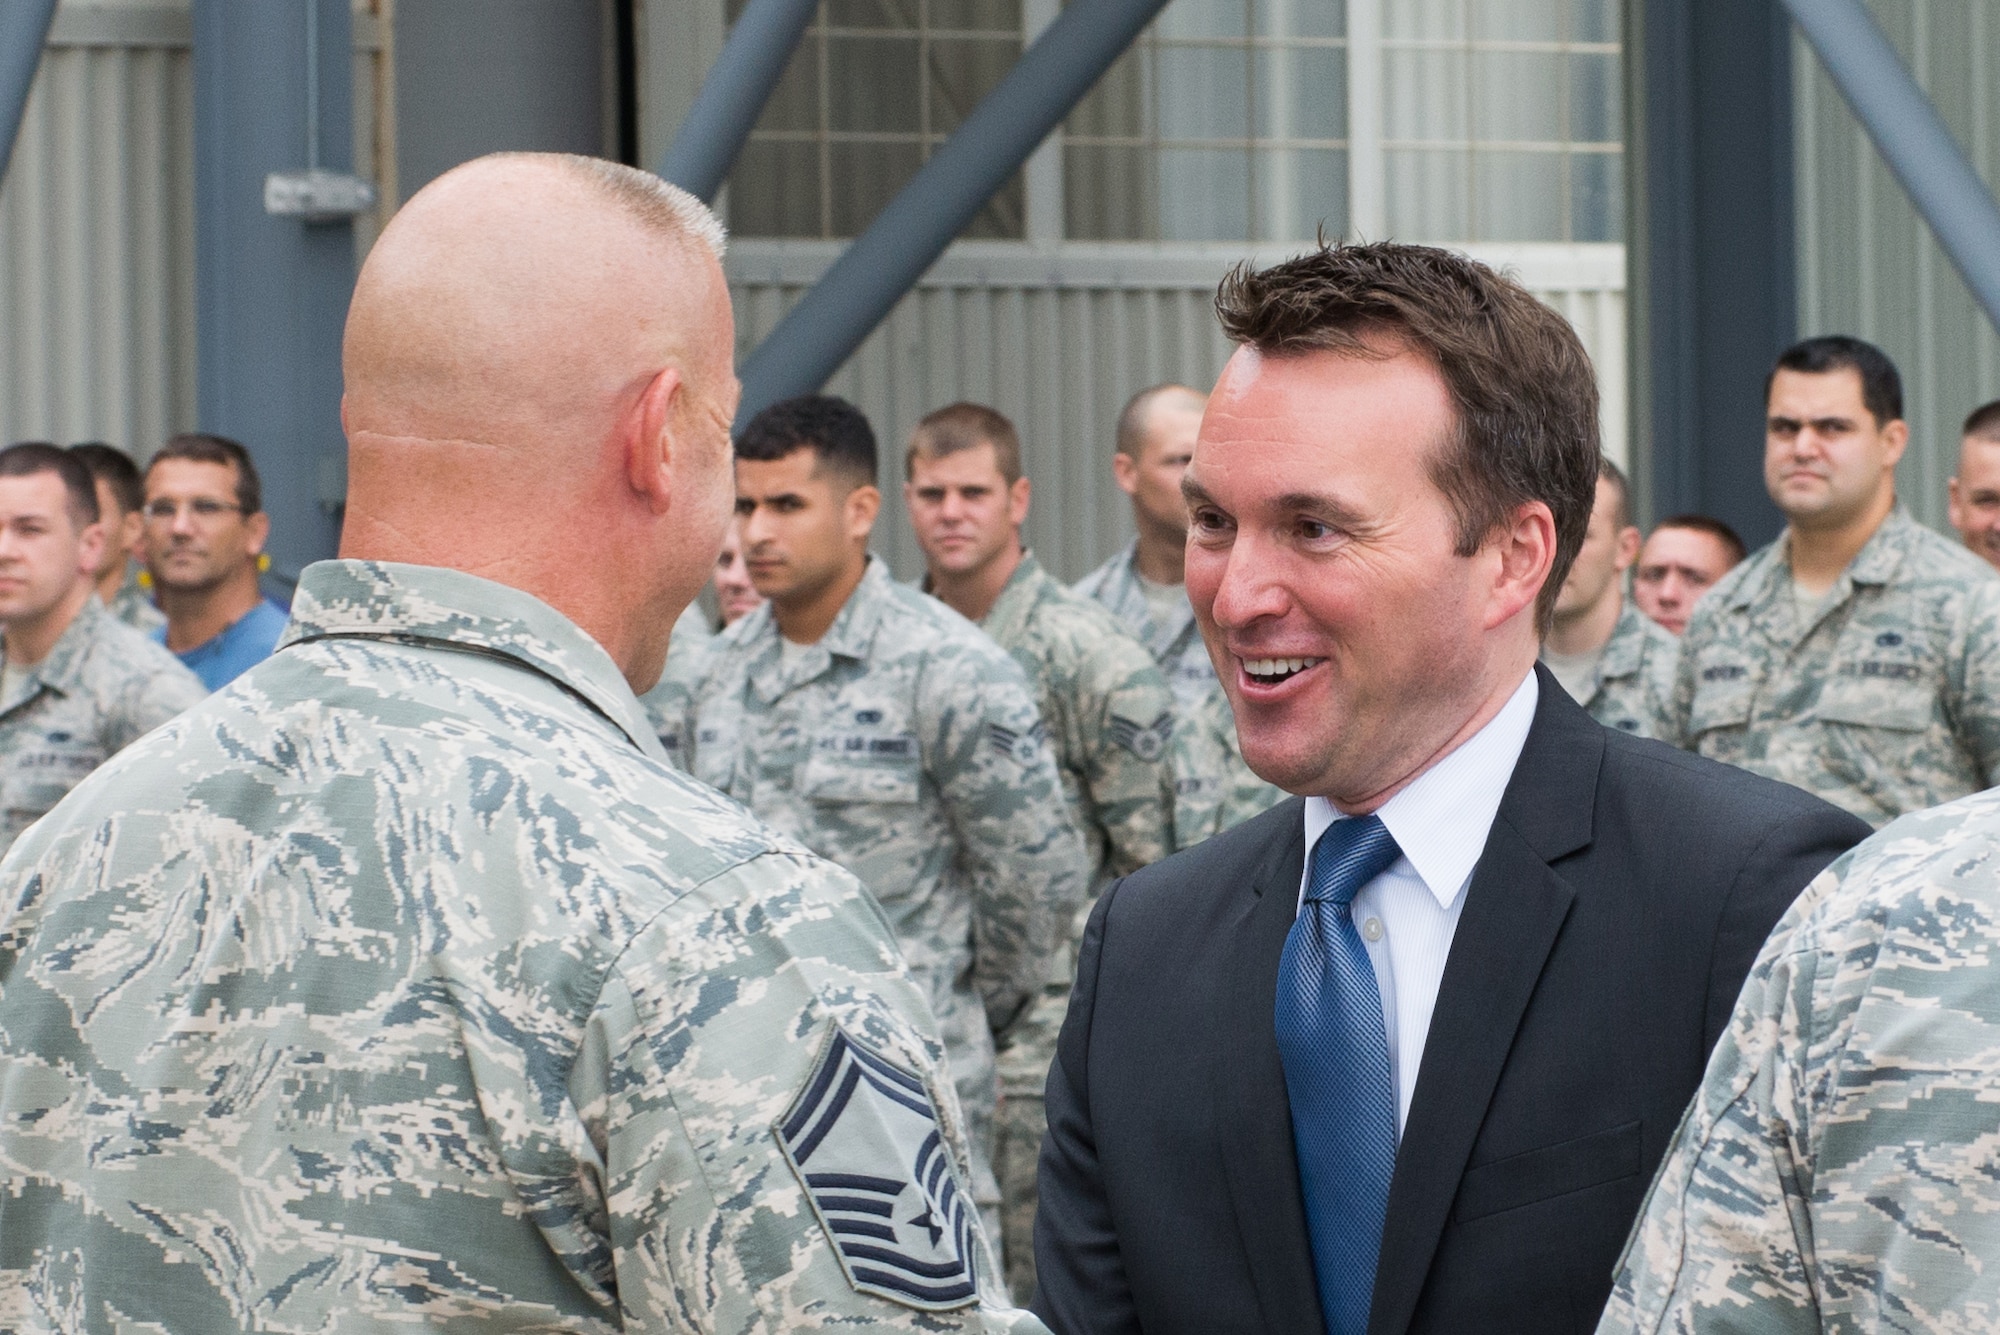 Acting Secretary of the Air Force, Eric Fanning, visits Westover Air Reserve Base, Mass., July 25. During his tour of the nation's largest Air Force Reserve base, Fanning saw its joint-service mission, "flew" a C-5 simulator, toured the base's control tower, and spoke to more than 450 troops about Air Force issues. (U.S. Air Force photo/MSgt. Todd Panico)